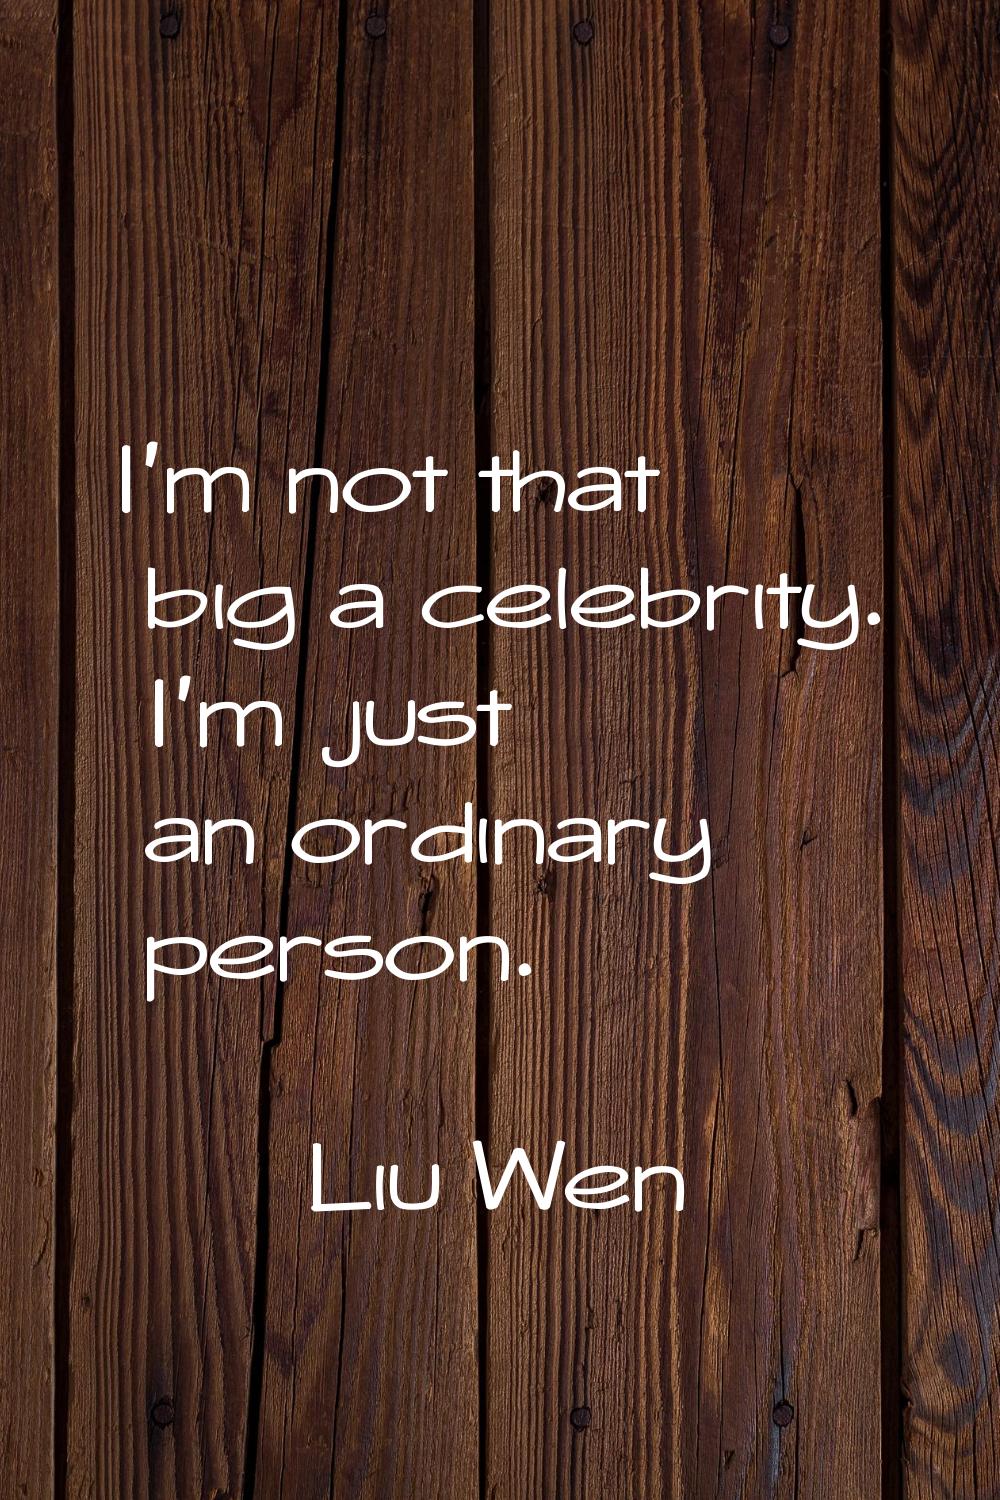 I'm not that big a celebrity. I'm just an ordinary person.